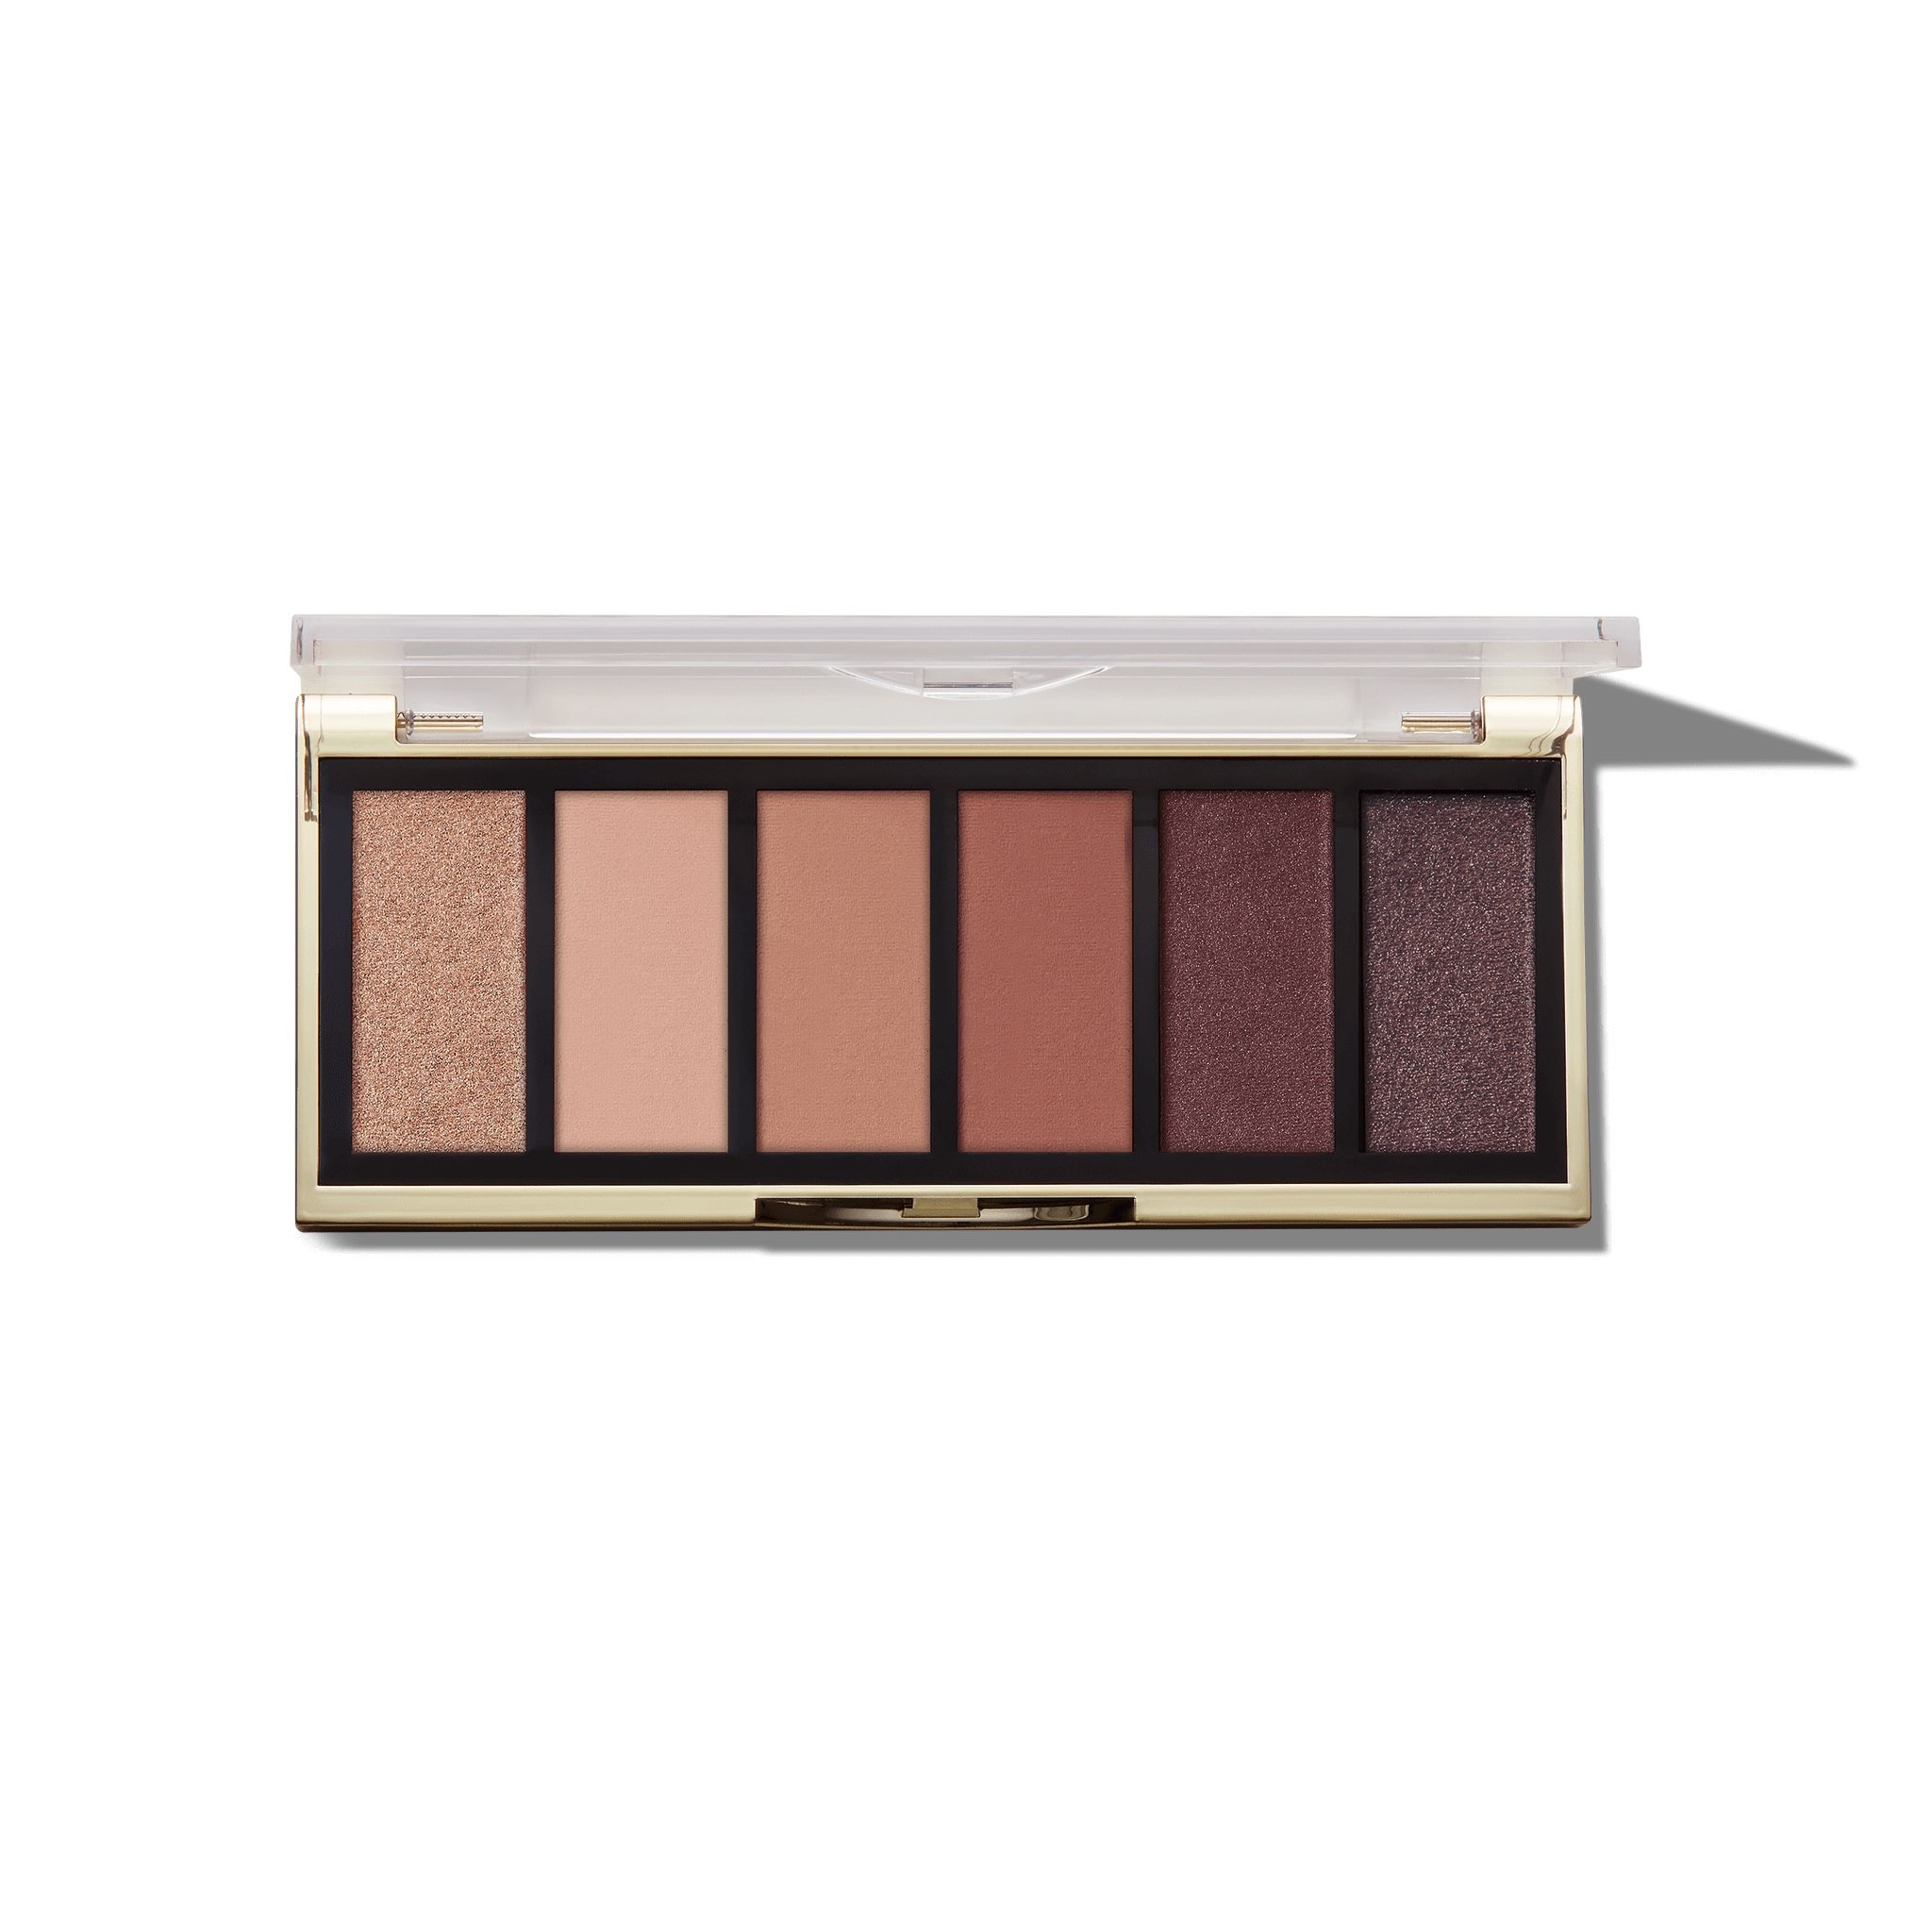 Most Wanted Eyeshadow Palette